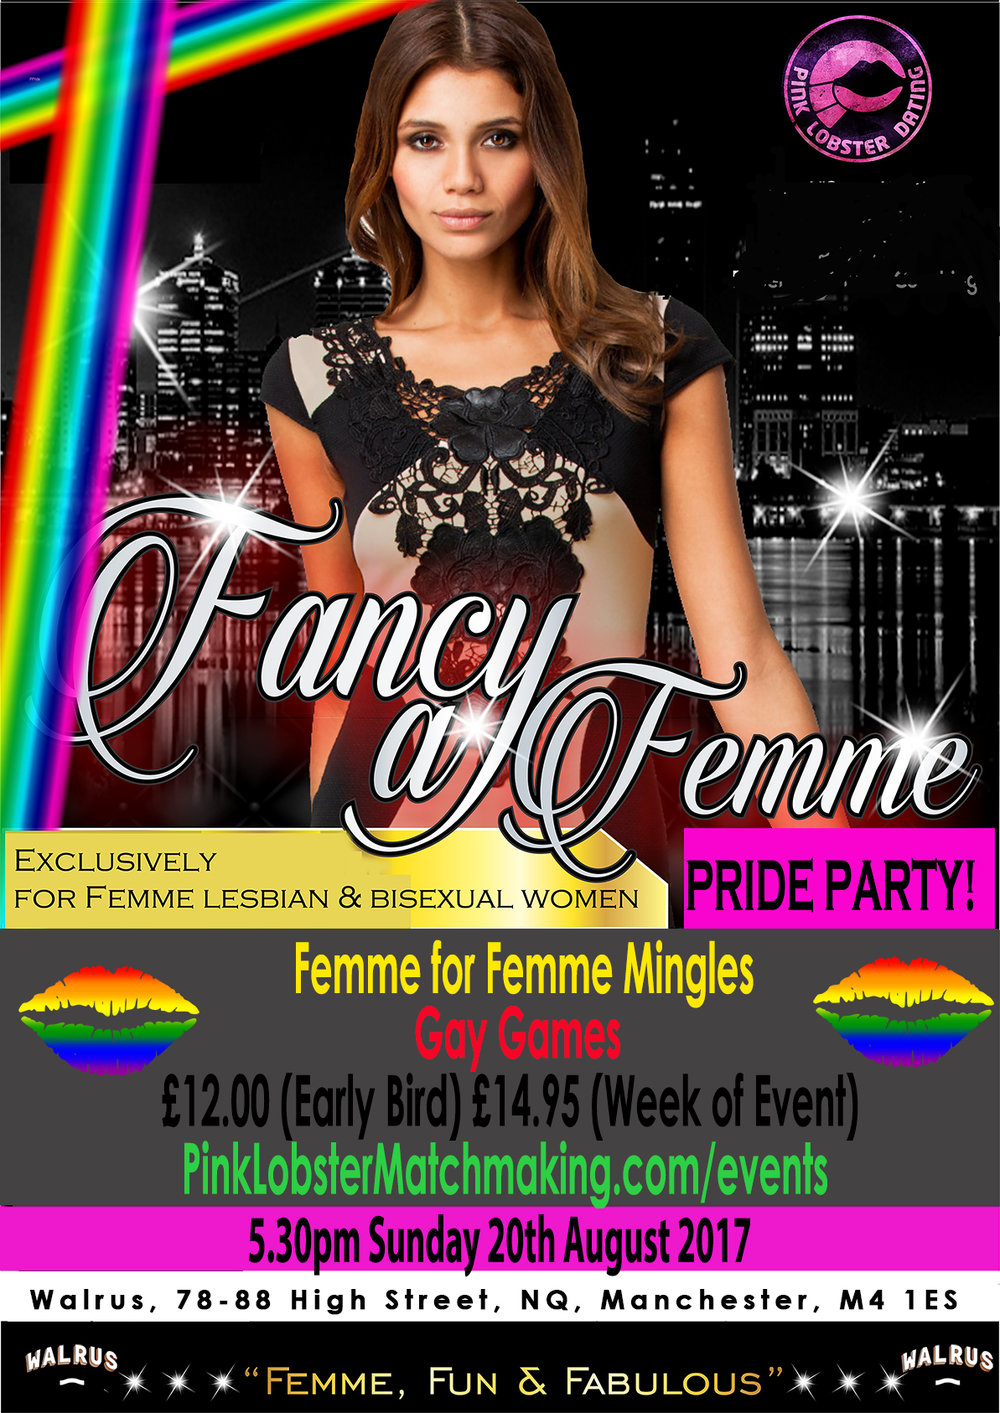 Femme Manchester Singles Lesbian, Bisexuals, women who like women for love